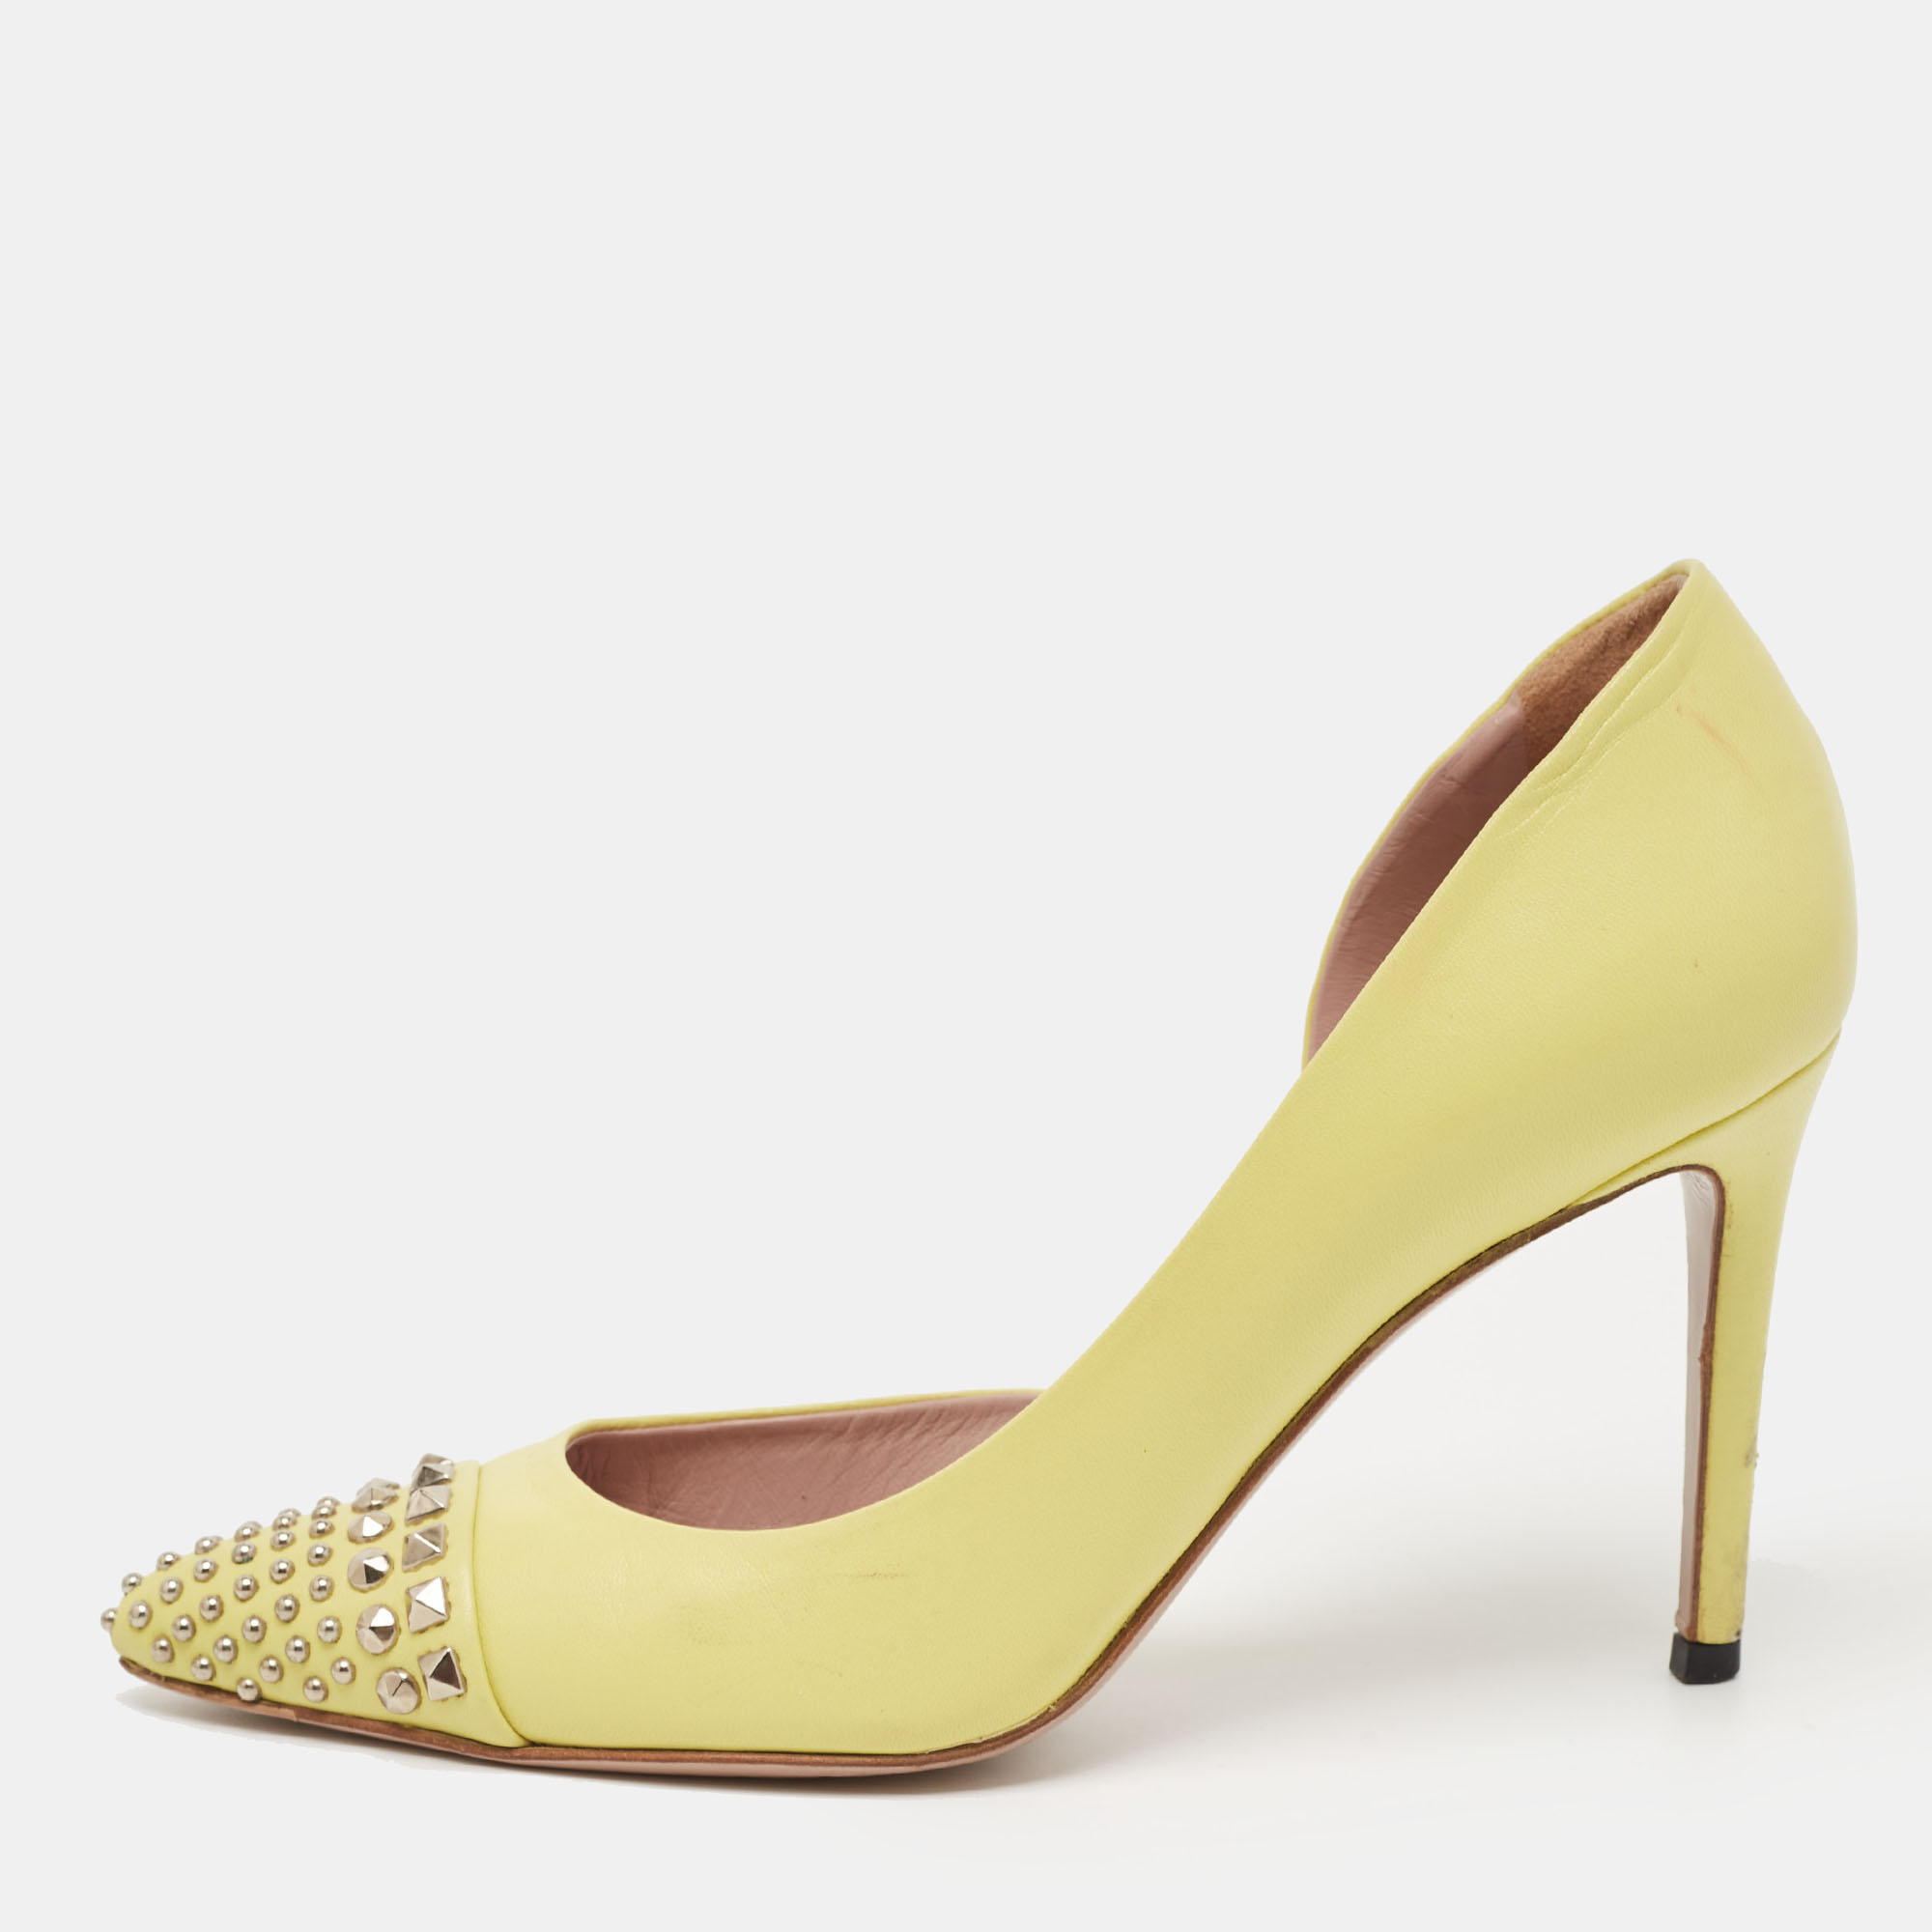 Pre-owned Gucci Yellow Leather Studded D'orsay Pointed Toe Pumps Size 36.5